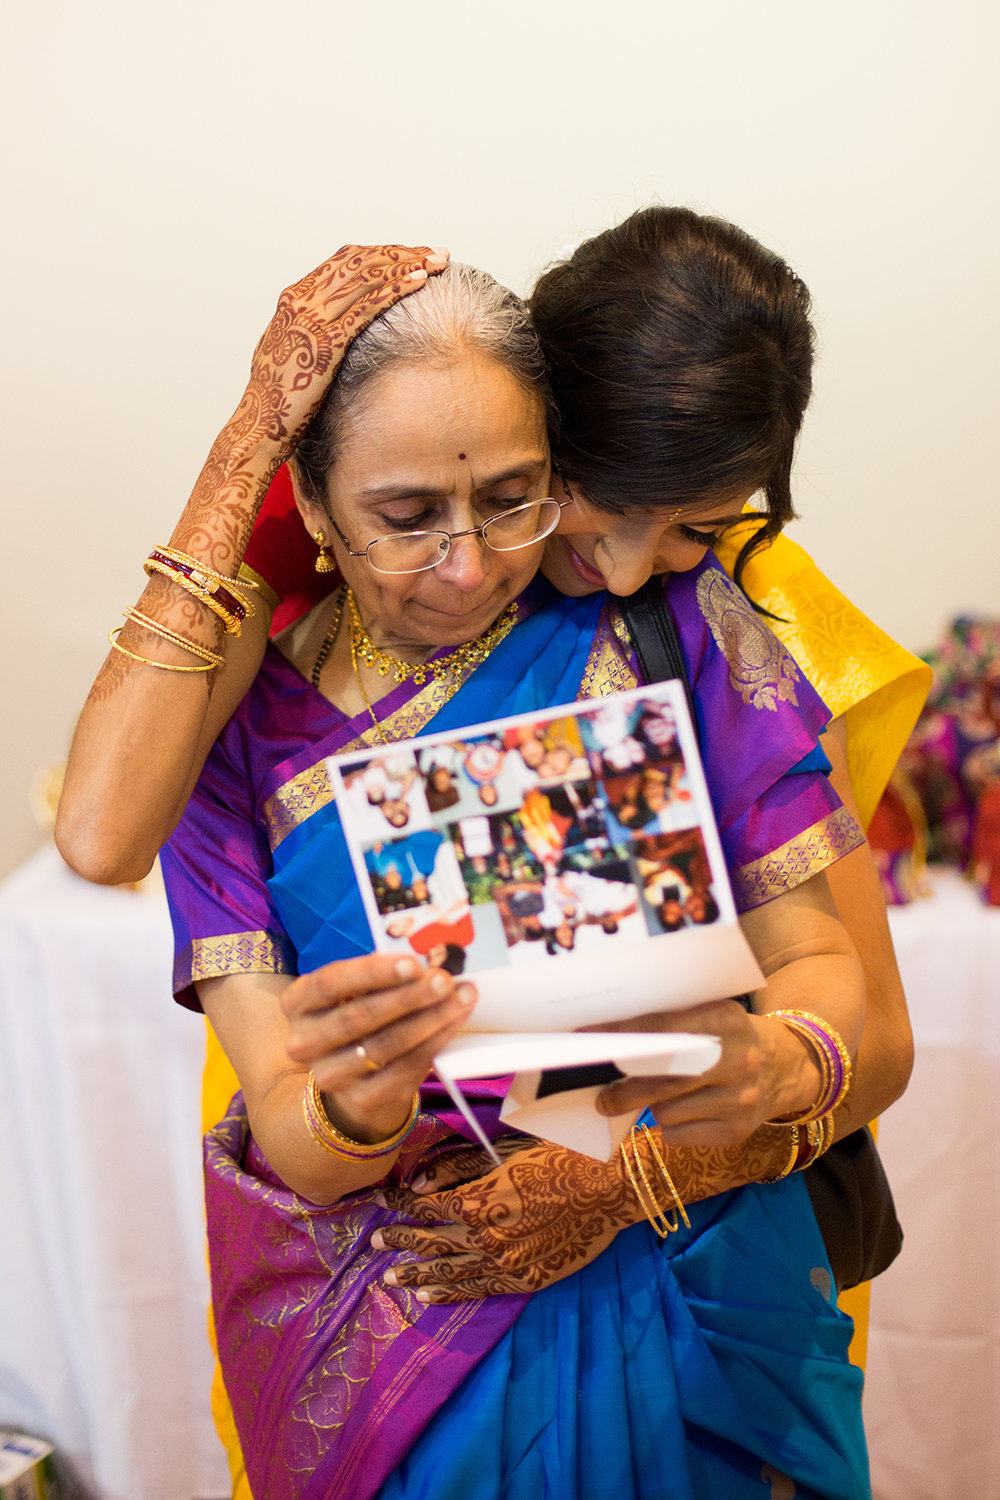 Sweet Moment Between and Indian Bride and Her Mother